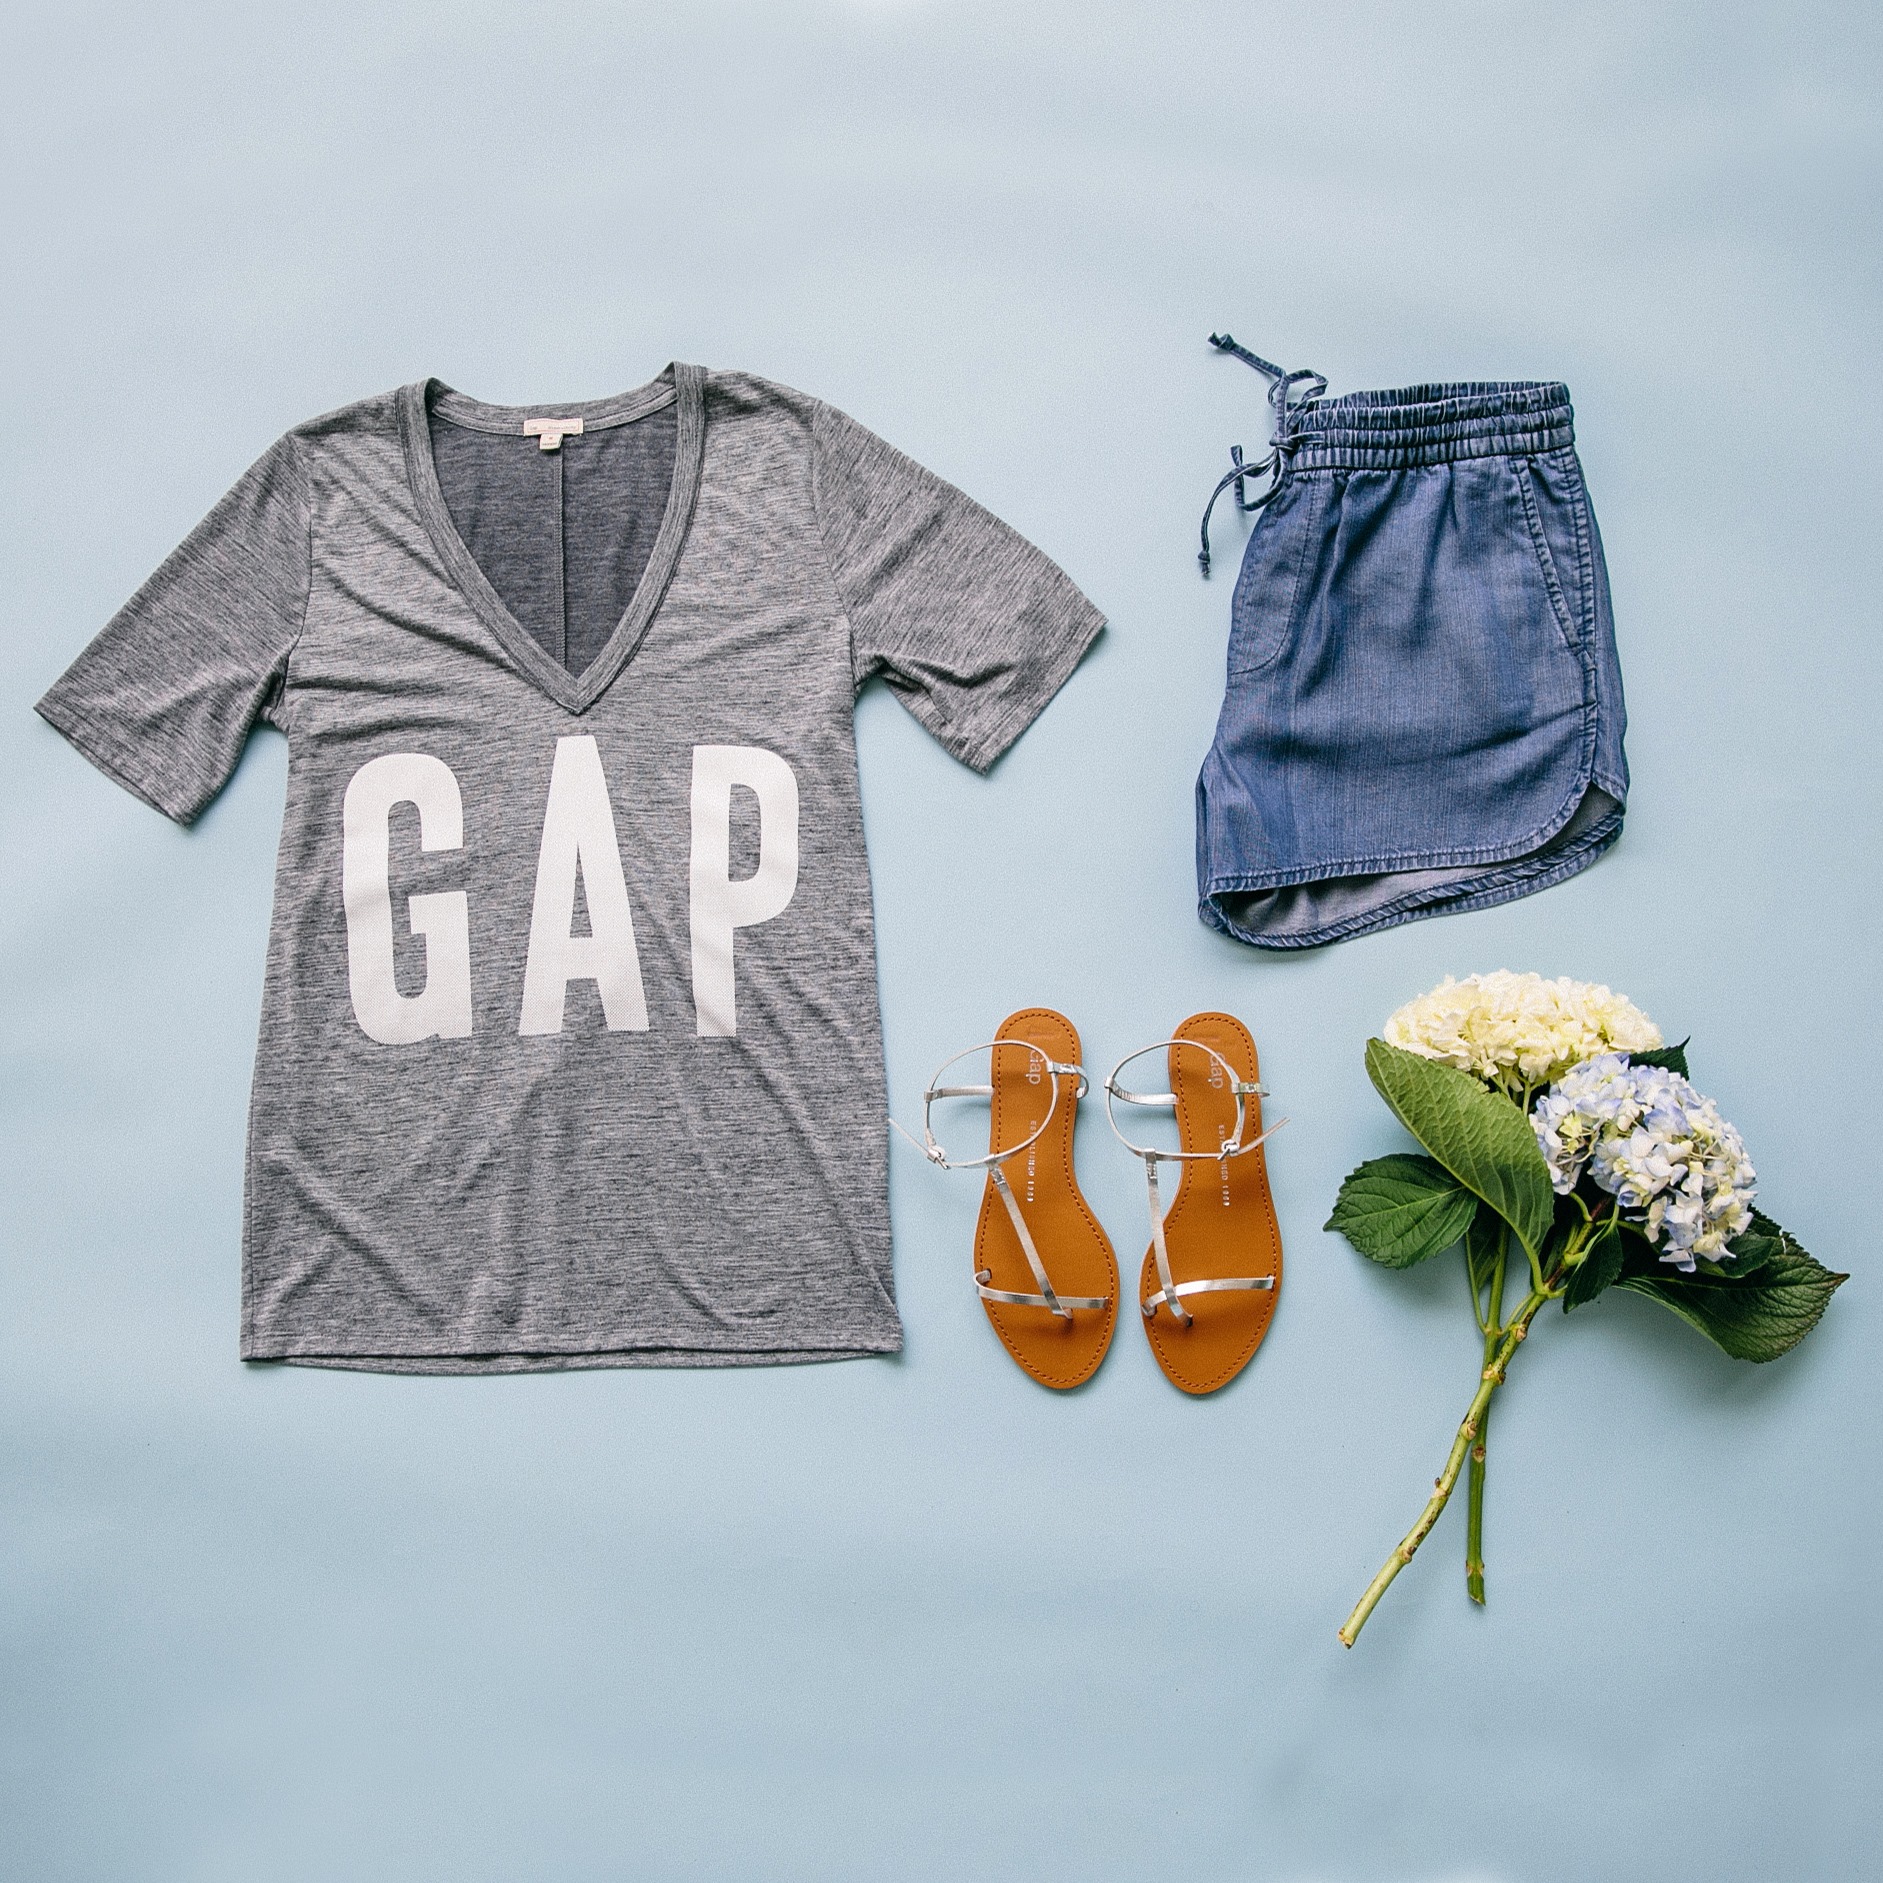 Gap Canada Sale: Save 40% Off Purchases Today Only! - Canadian Freebies ...